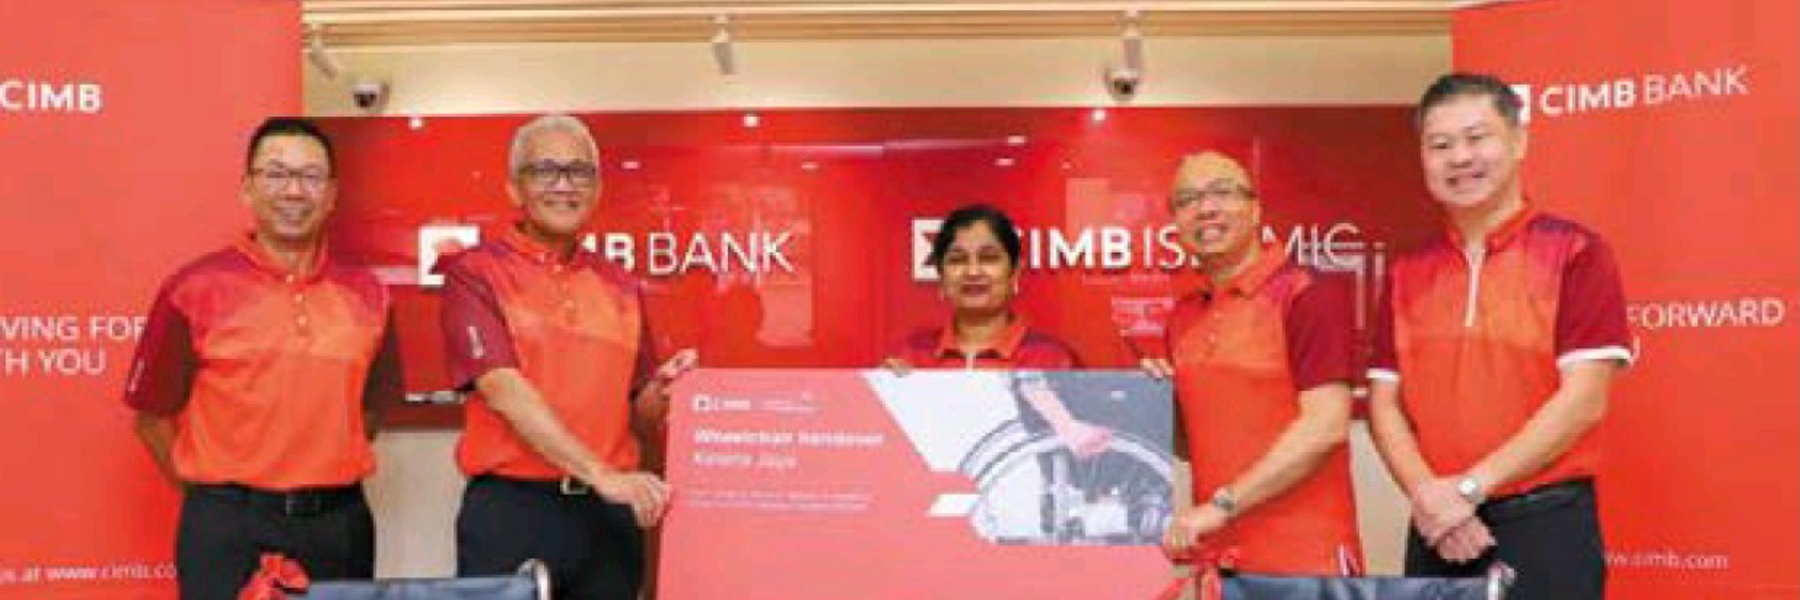 CIMB Bank making wheelchairs available for all their branches